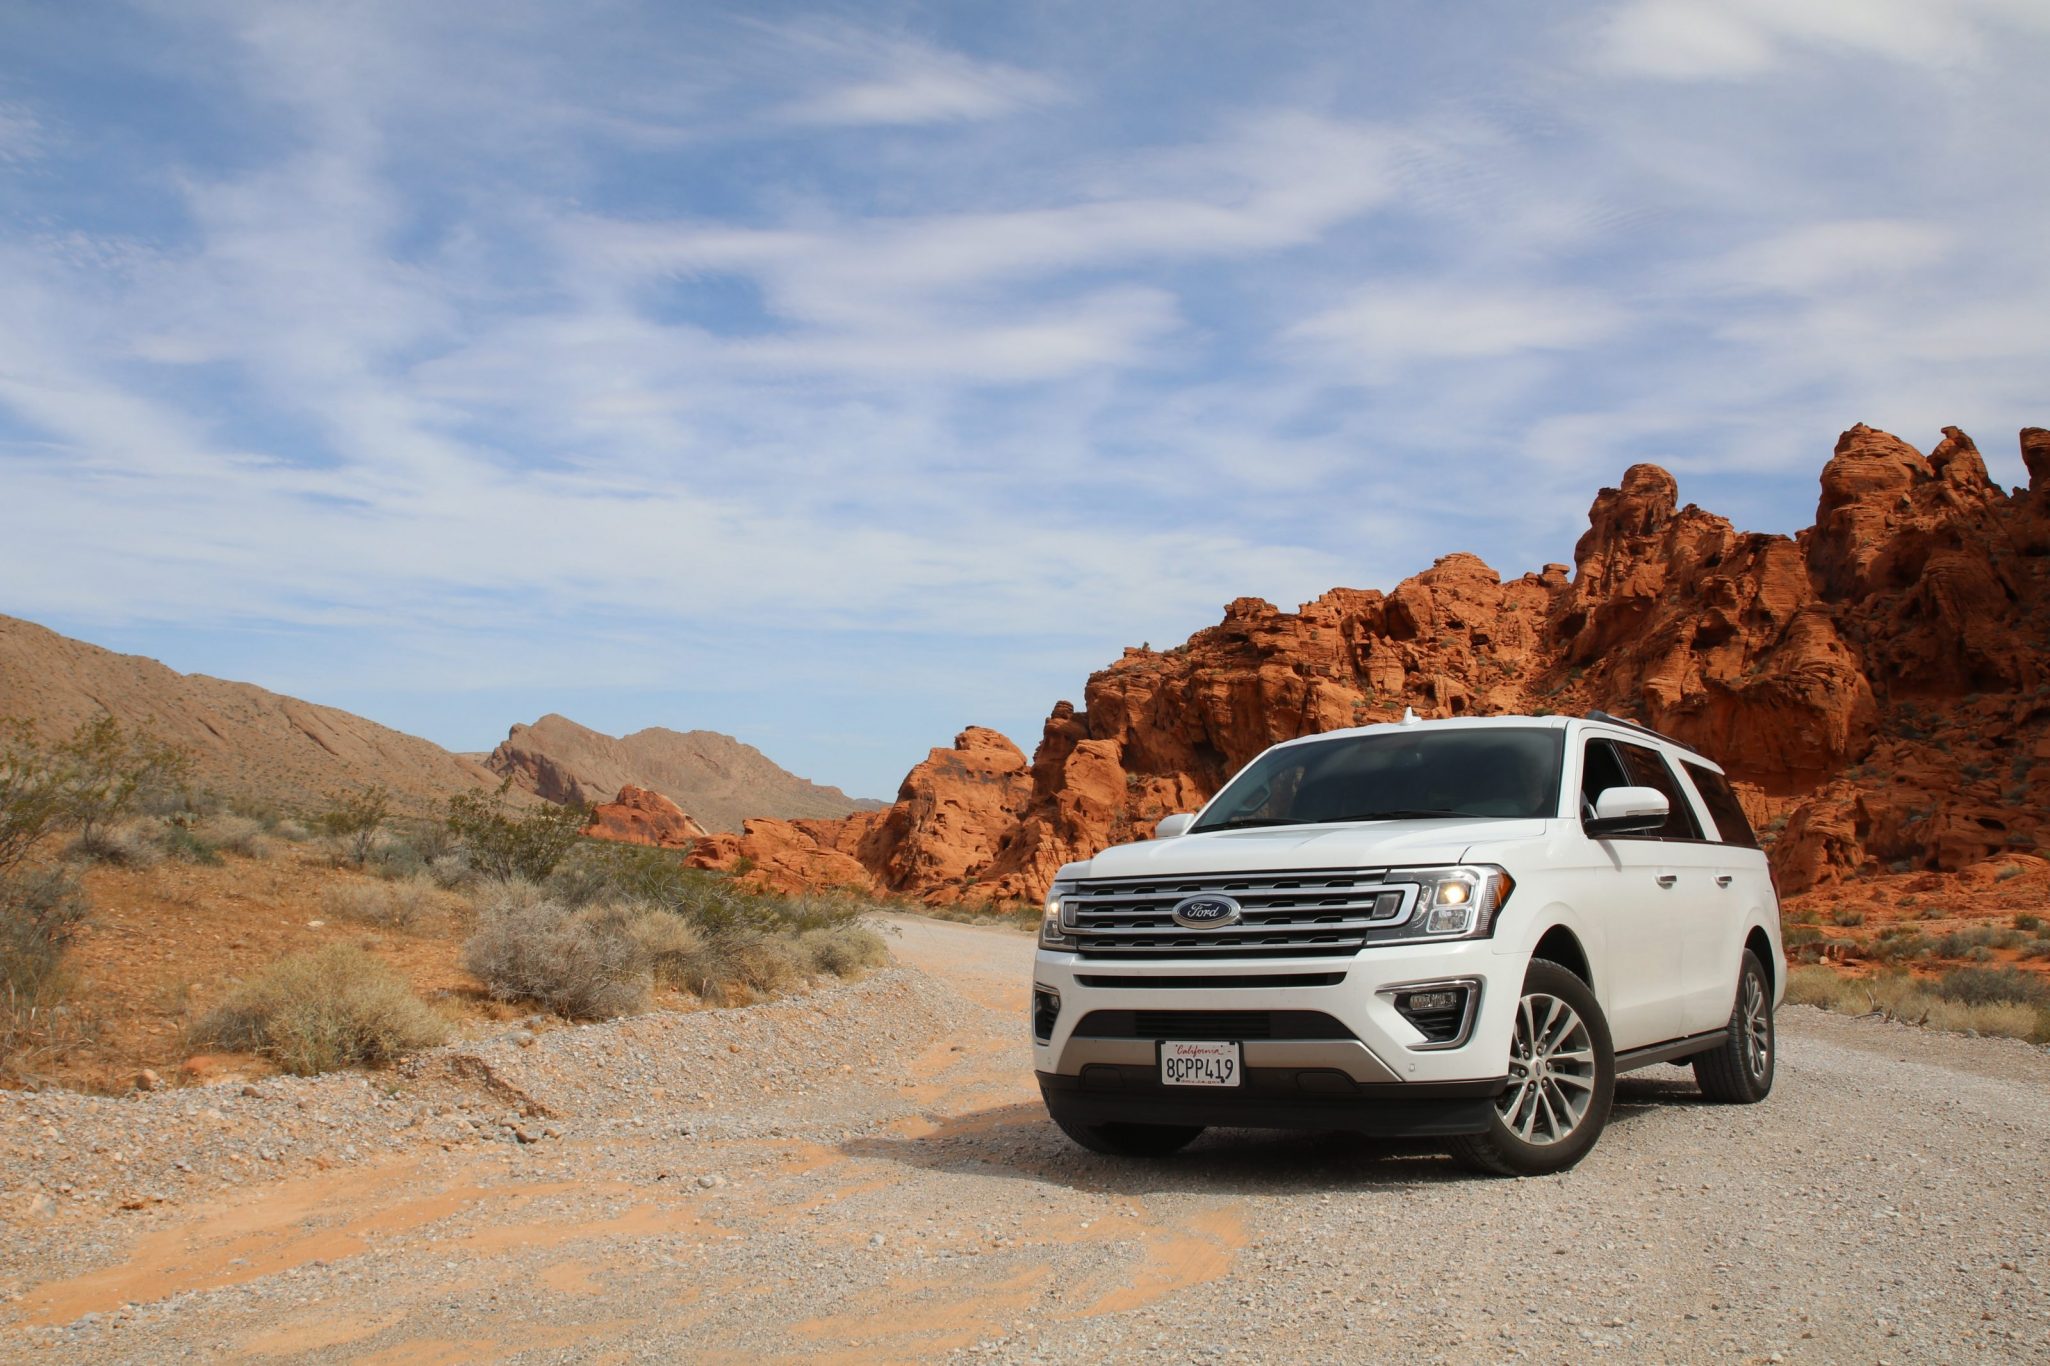 Car Ford Moving Desert, road trip packing list